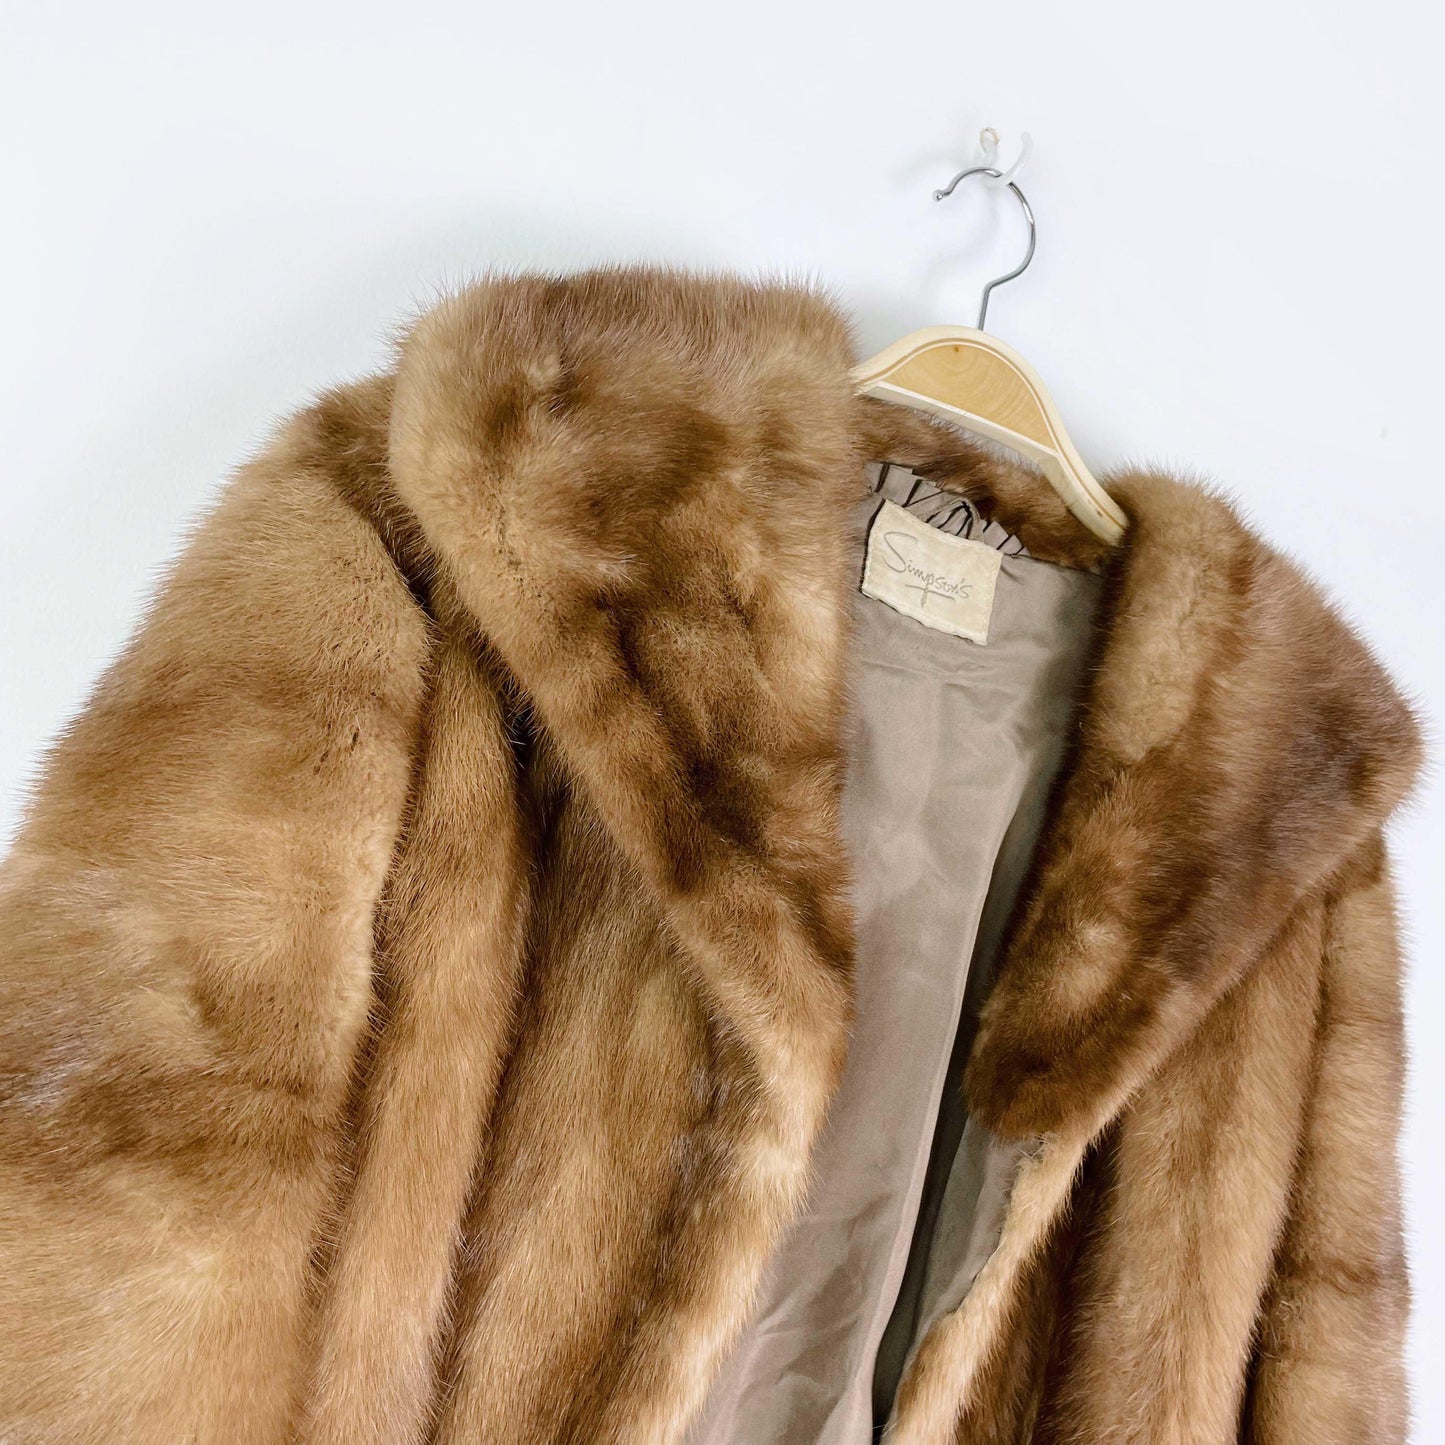 simpsons caramel brown mink open cropped jacket - size large